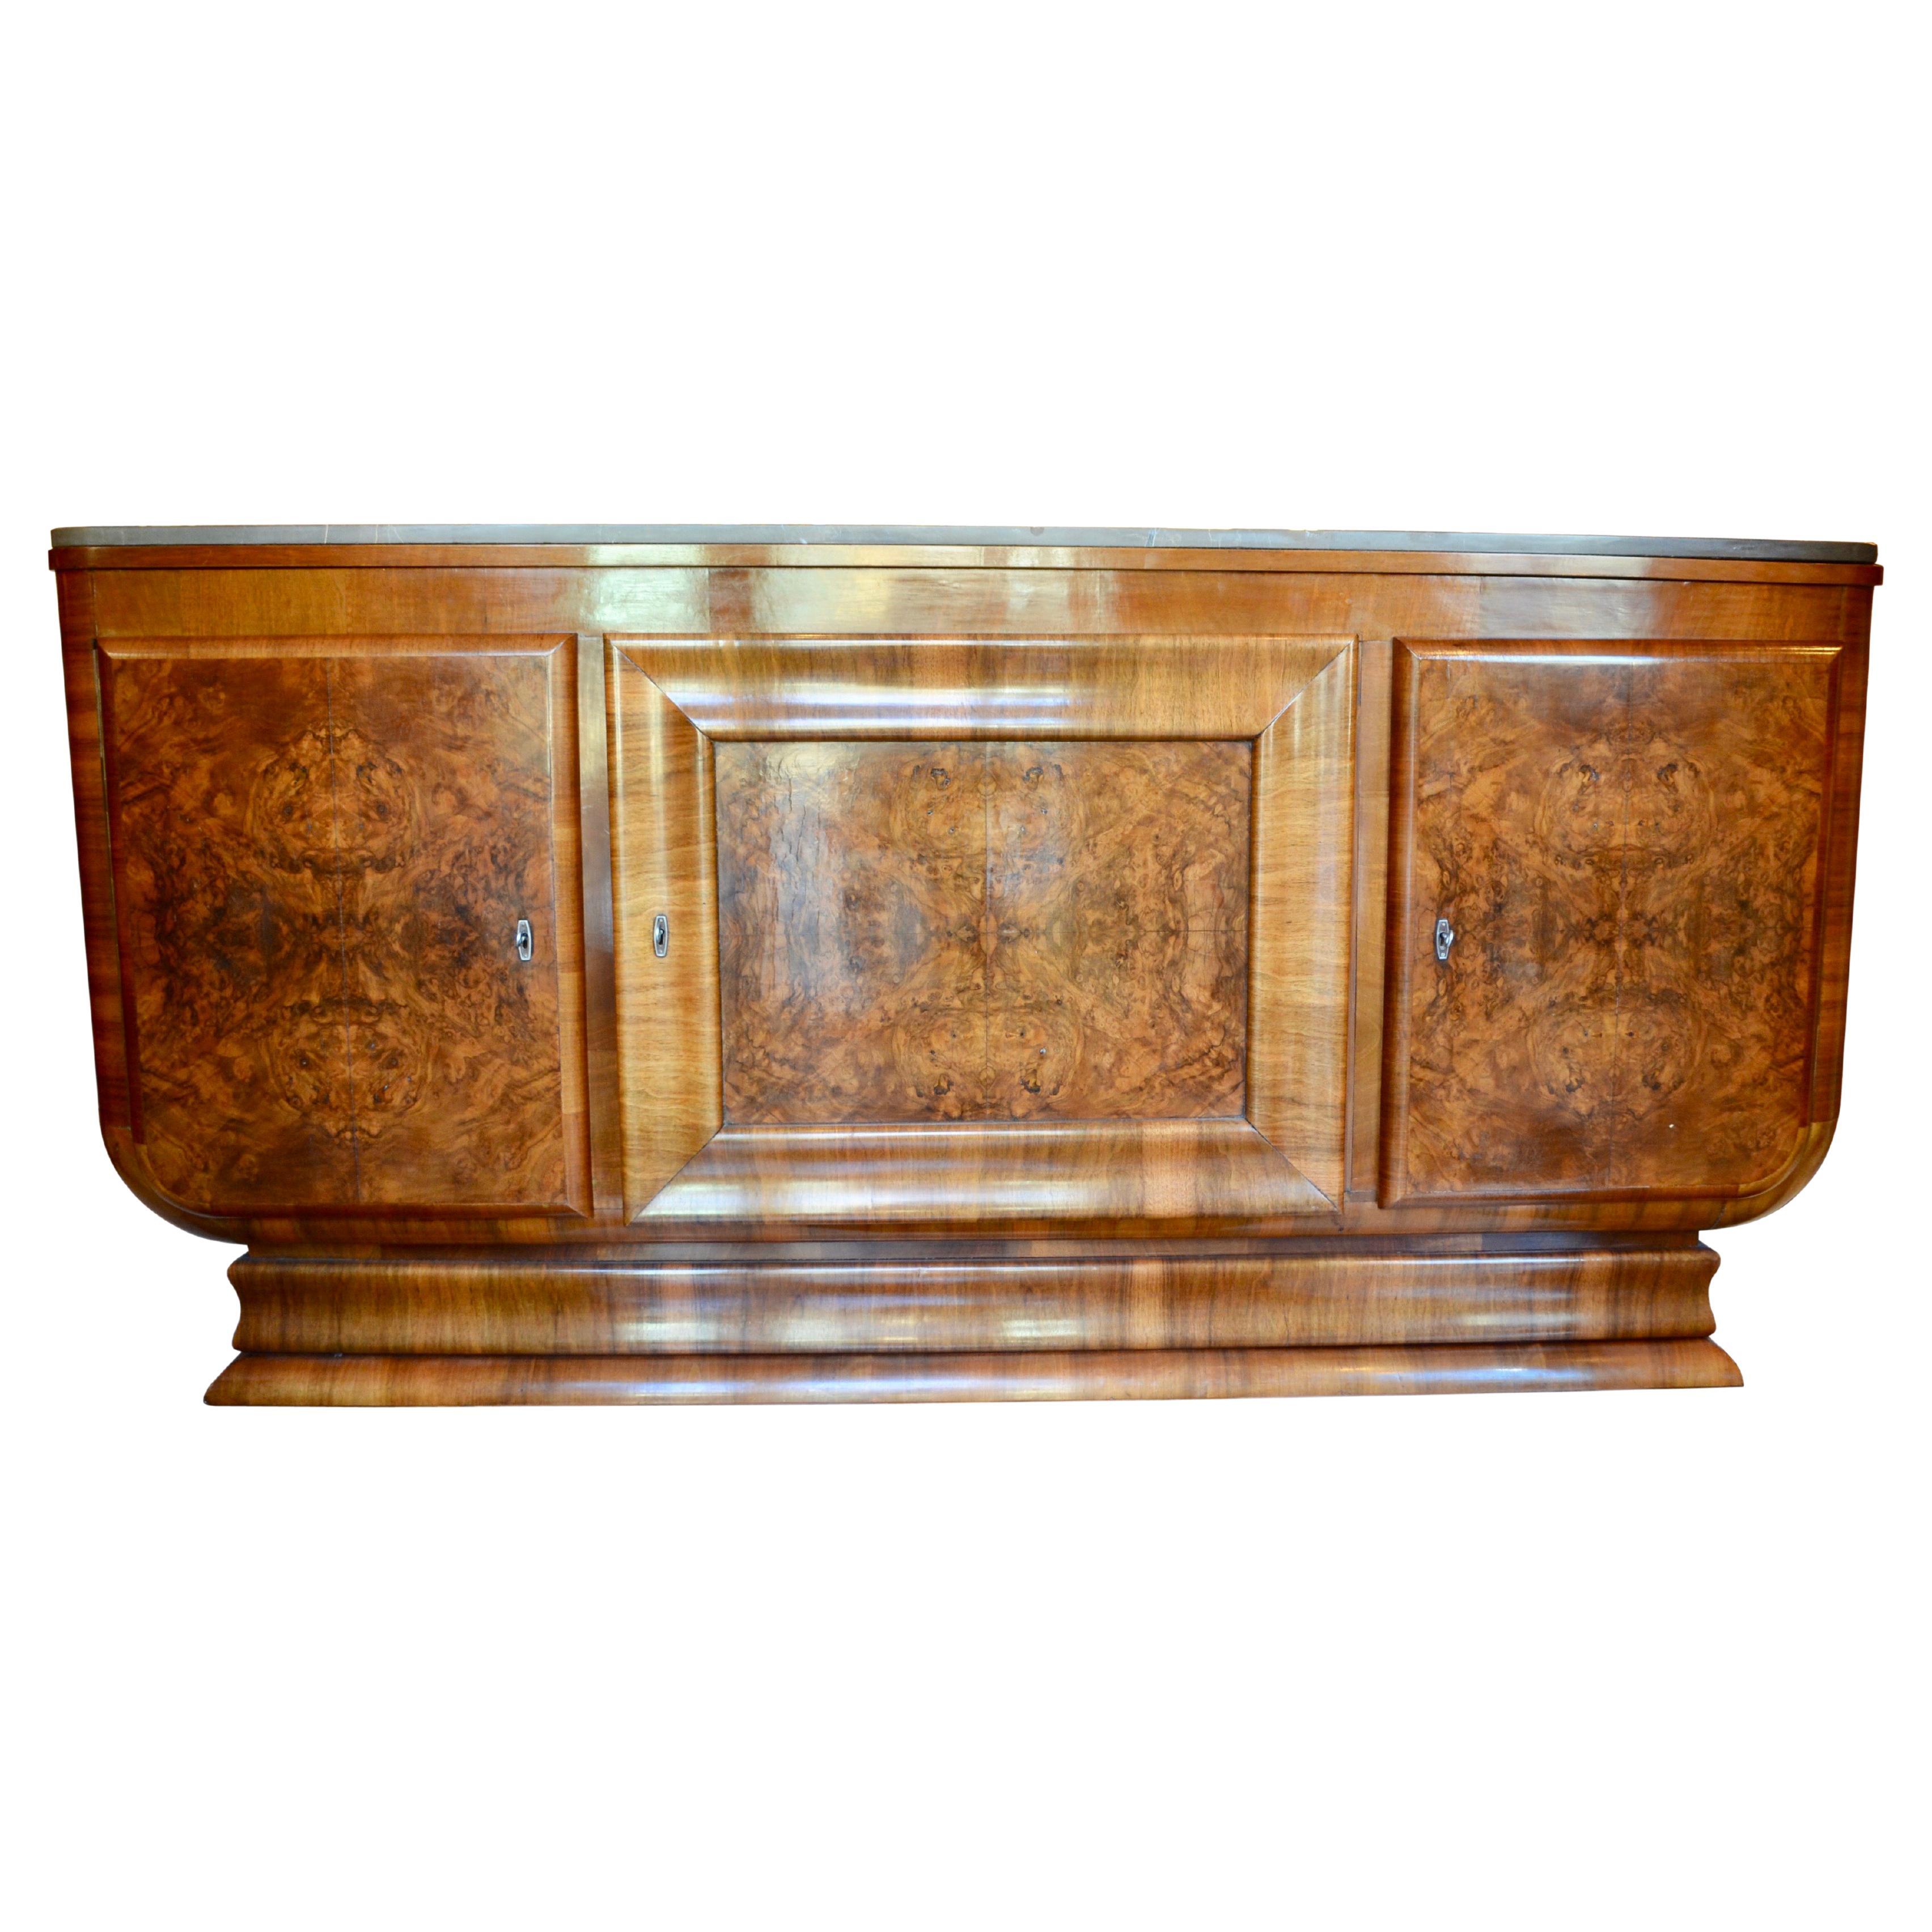 This is a classic three door 1930's French Art Deco sideboard or buffet in matched burl walnut veneered finish. The two side doors open to reveal a shelved interior and a top drawer. The larger central compartment opens to a simply shelved interior.